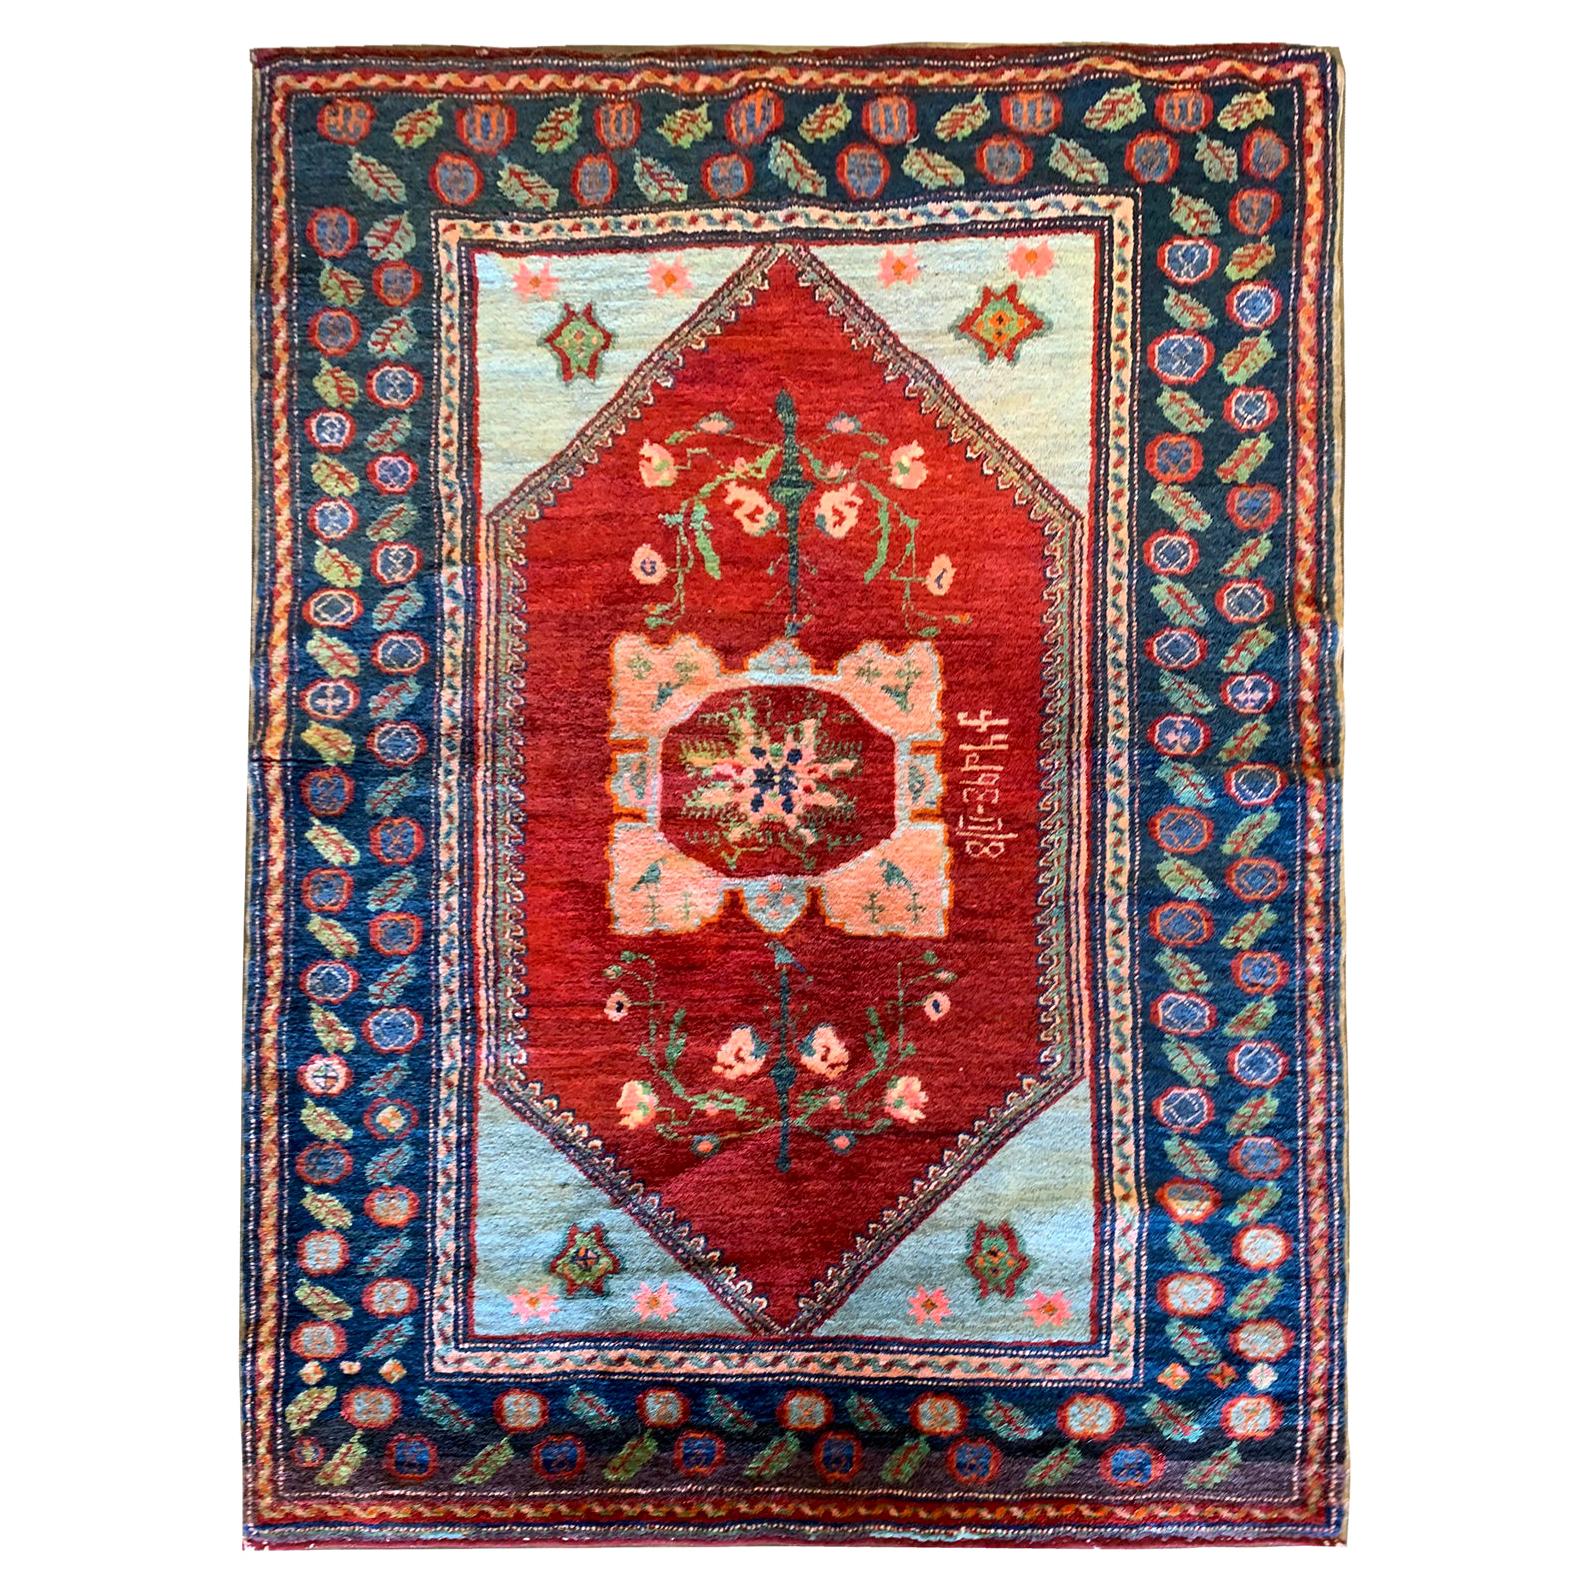 Antique Rugs Armenian Carpet, Handwoven Blue Red Wool Area Rug